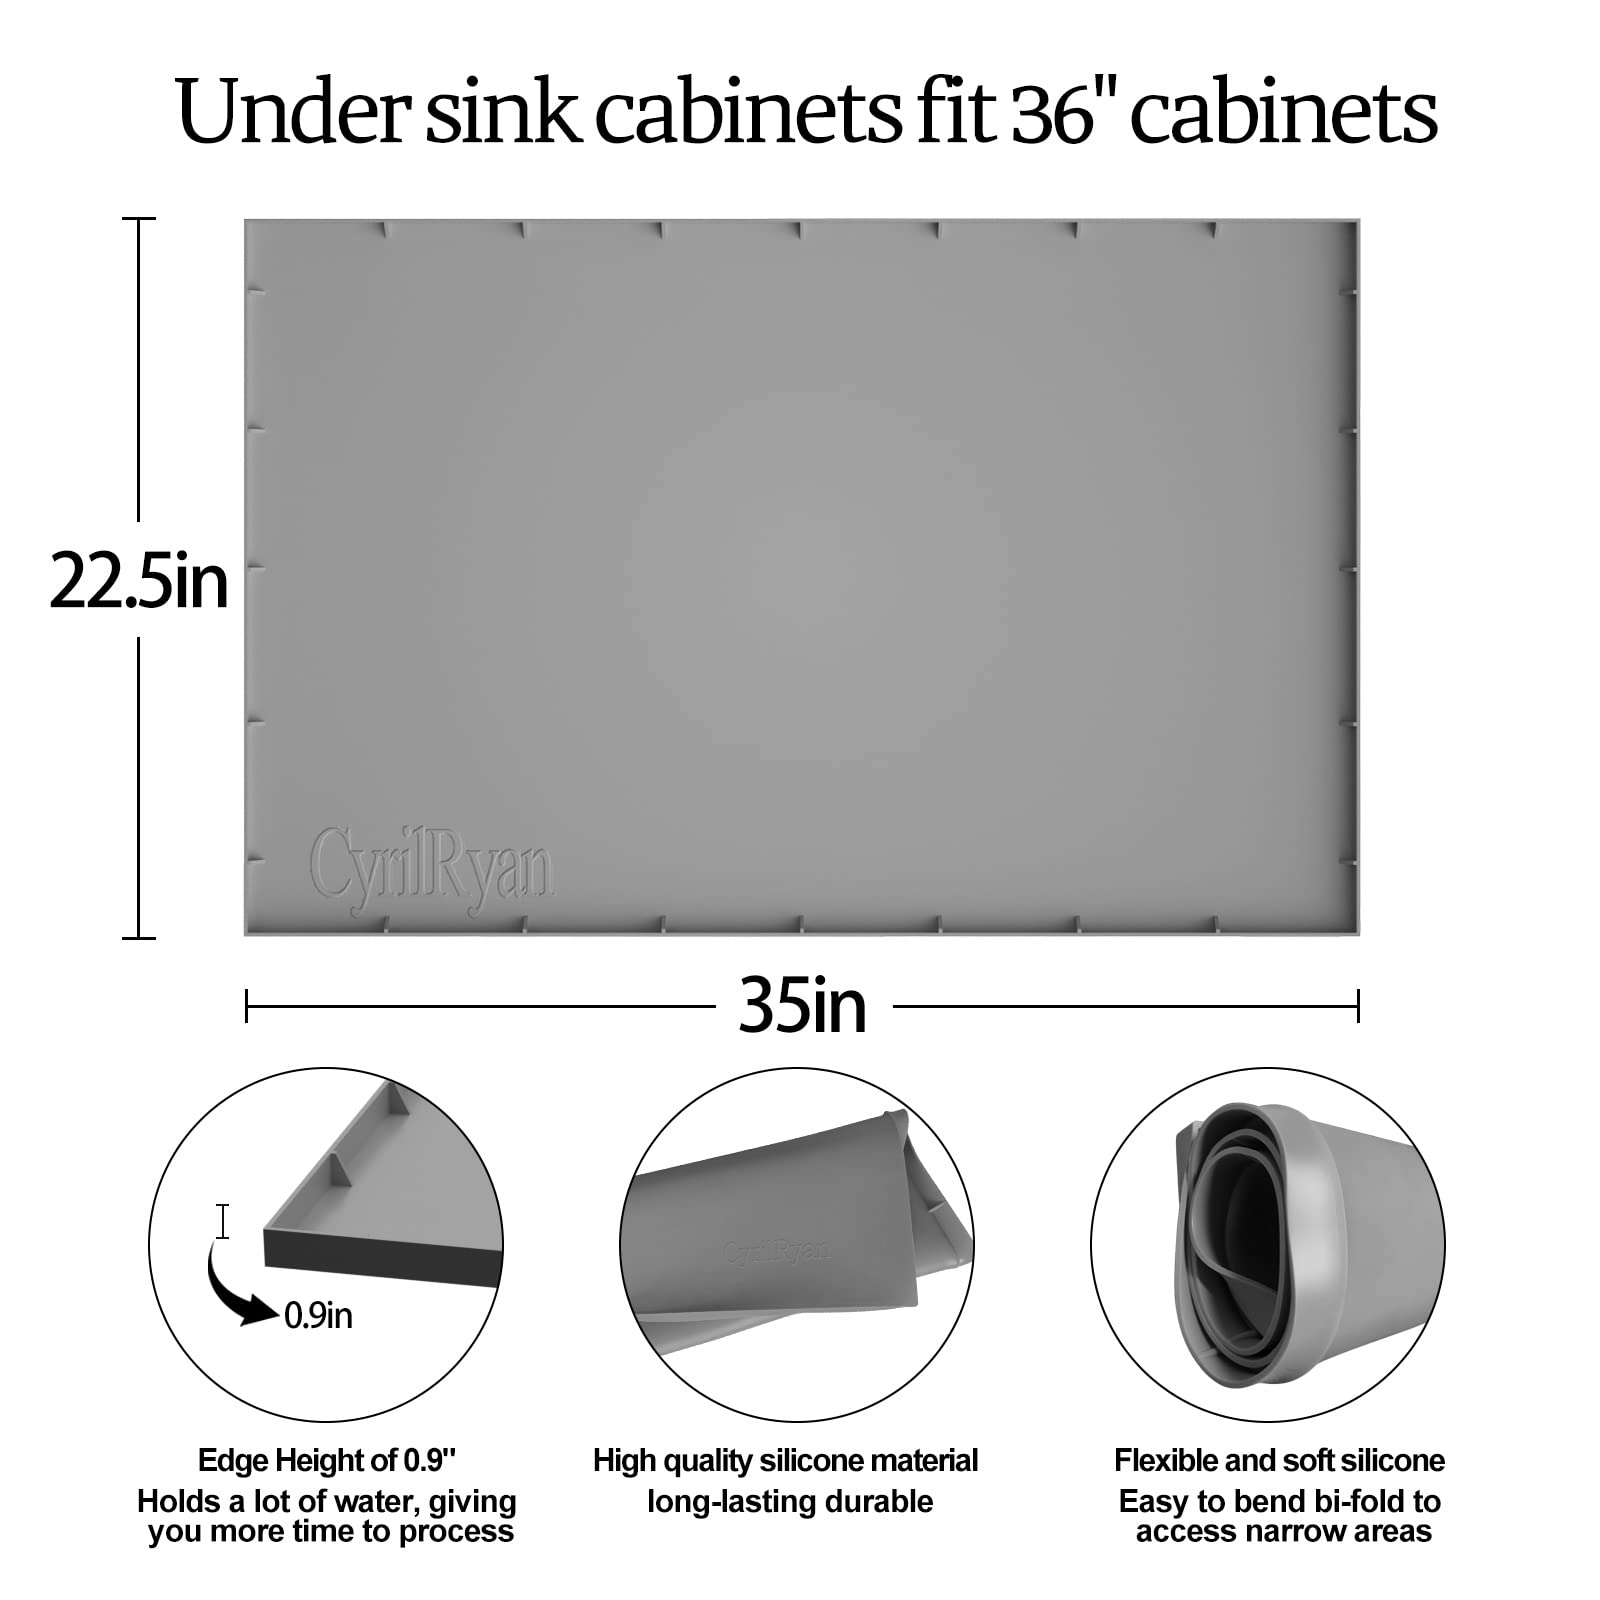 Under Sink Mat Waterproof for 36" Cabinet, Kitchen Rubber mat, Holds Over 3.3 Gallons Liquid Carbon Cabinets Leak Protector Bathroom Sink Line Drip Tray Sink Pan Gray 35x22.5 inch